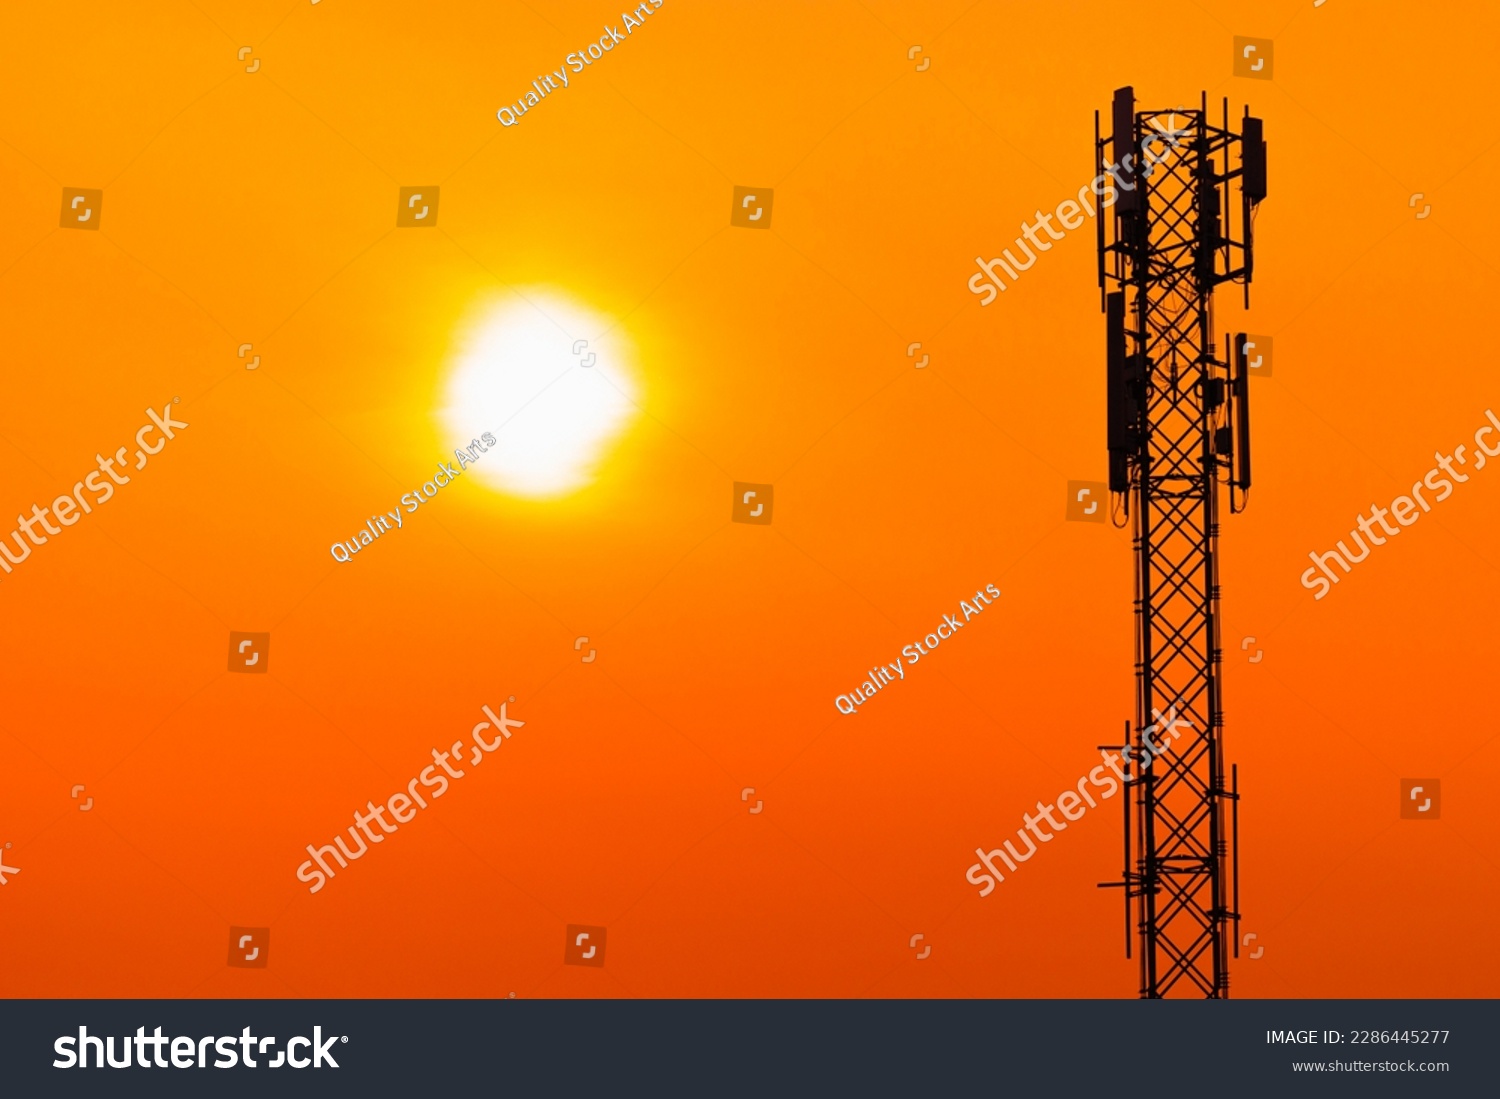 5G Cell Site Digital Cellular Telecommunication Tower Network Antenna on clear sunset orange sky background. #2286445277